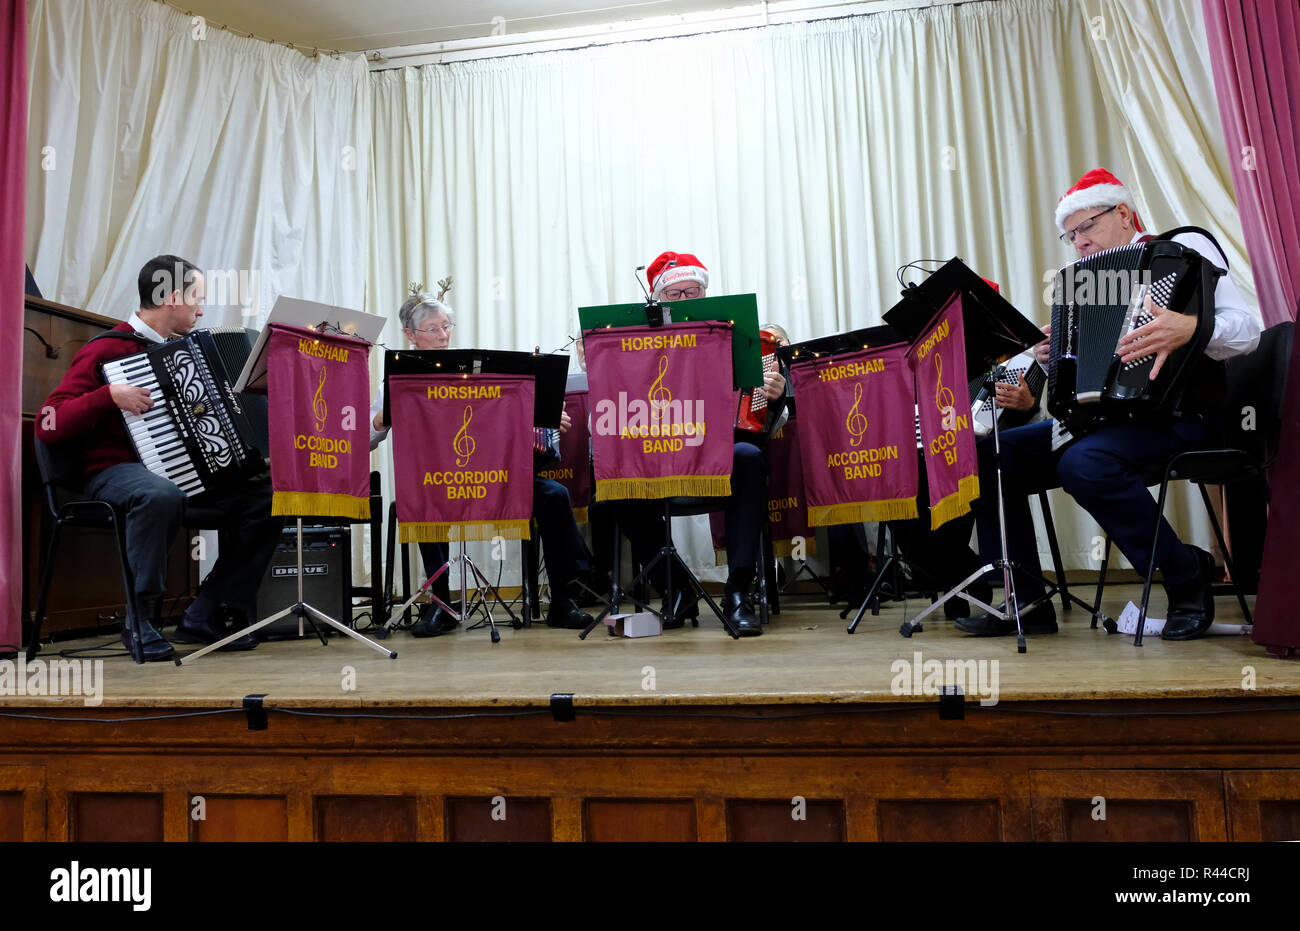 Horsham Accordion Band performing on stage in East Preston village as part of the village's Christmas celebrations. Stock Photo